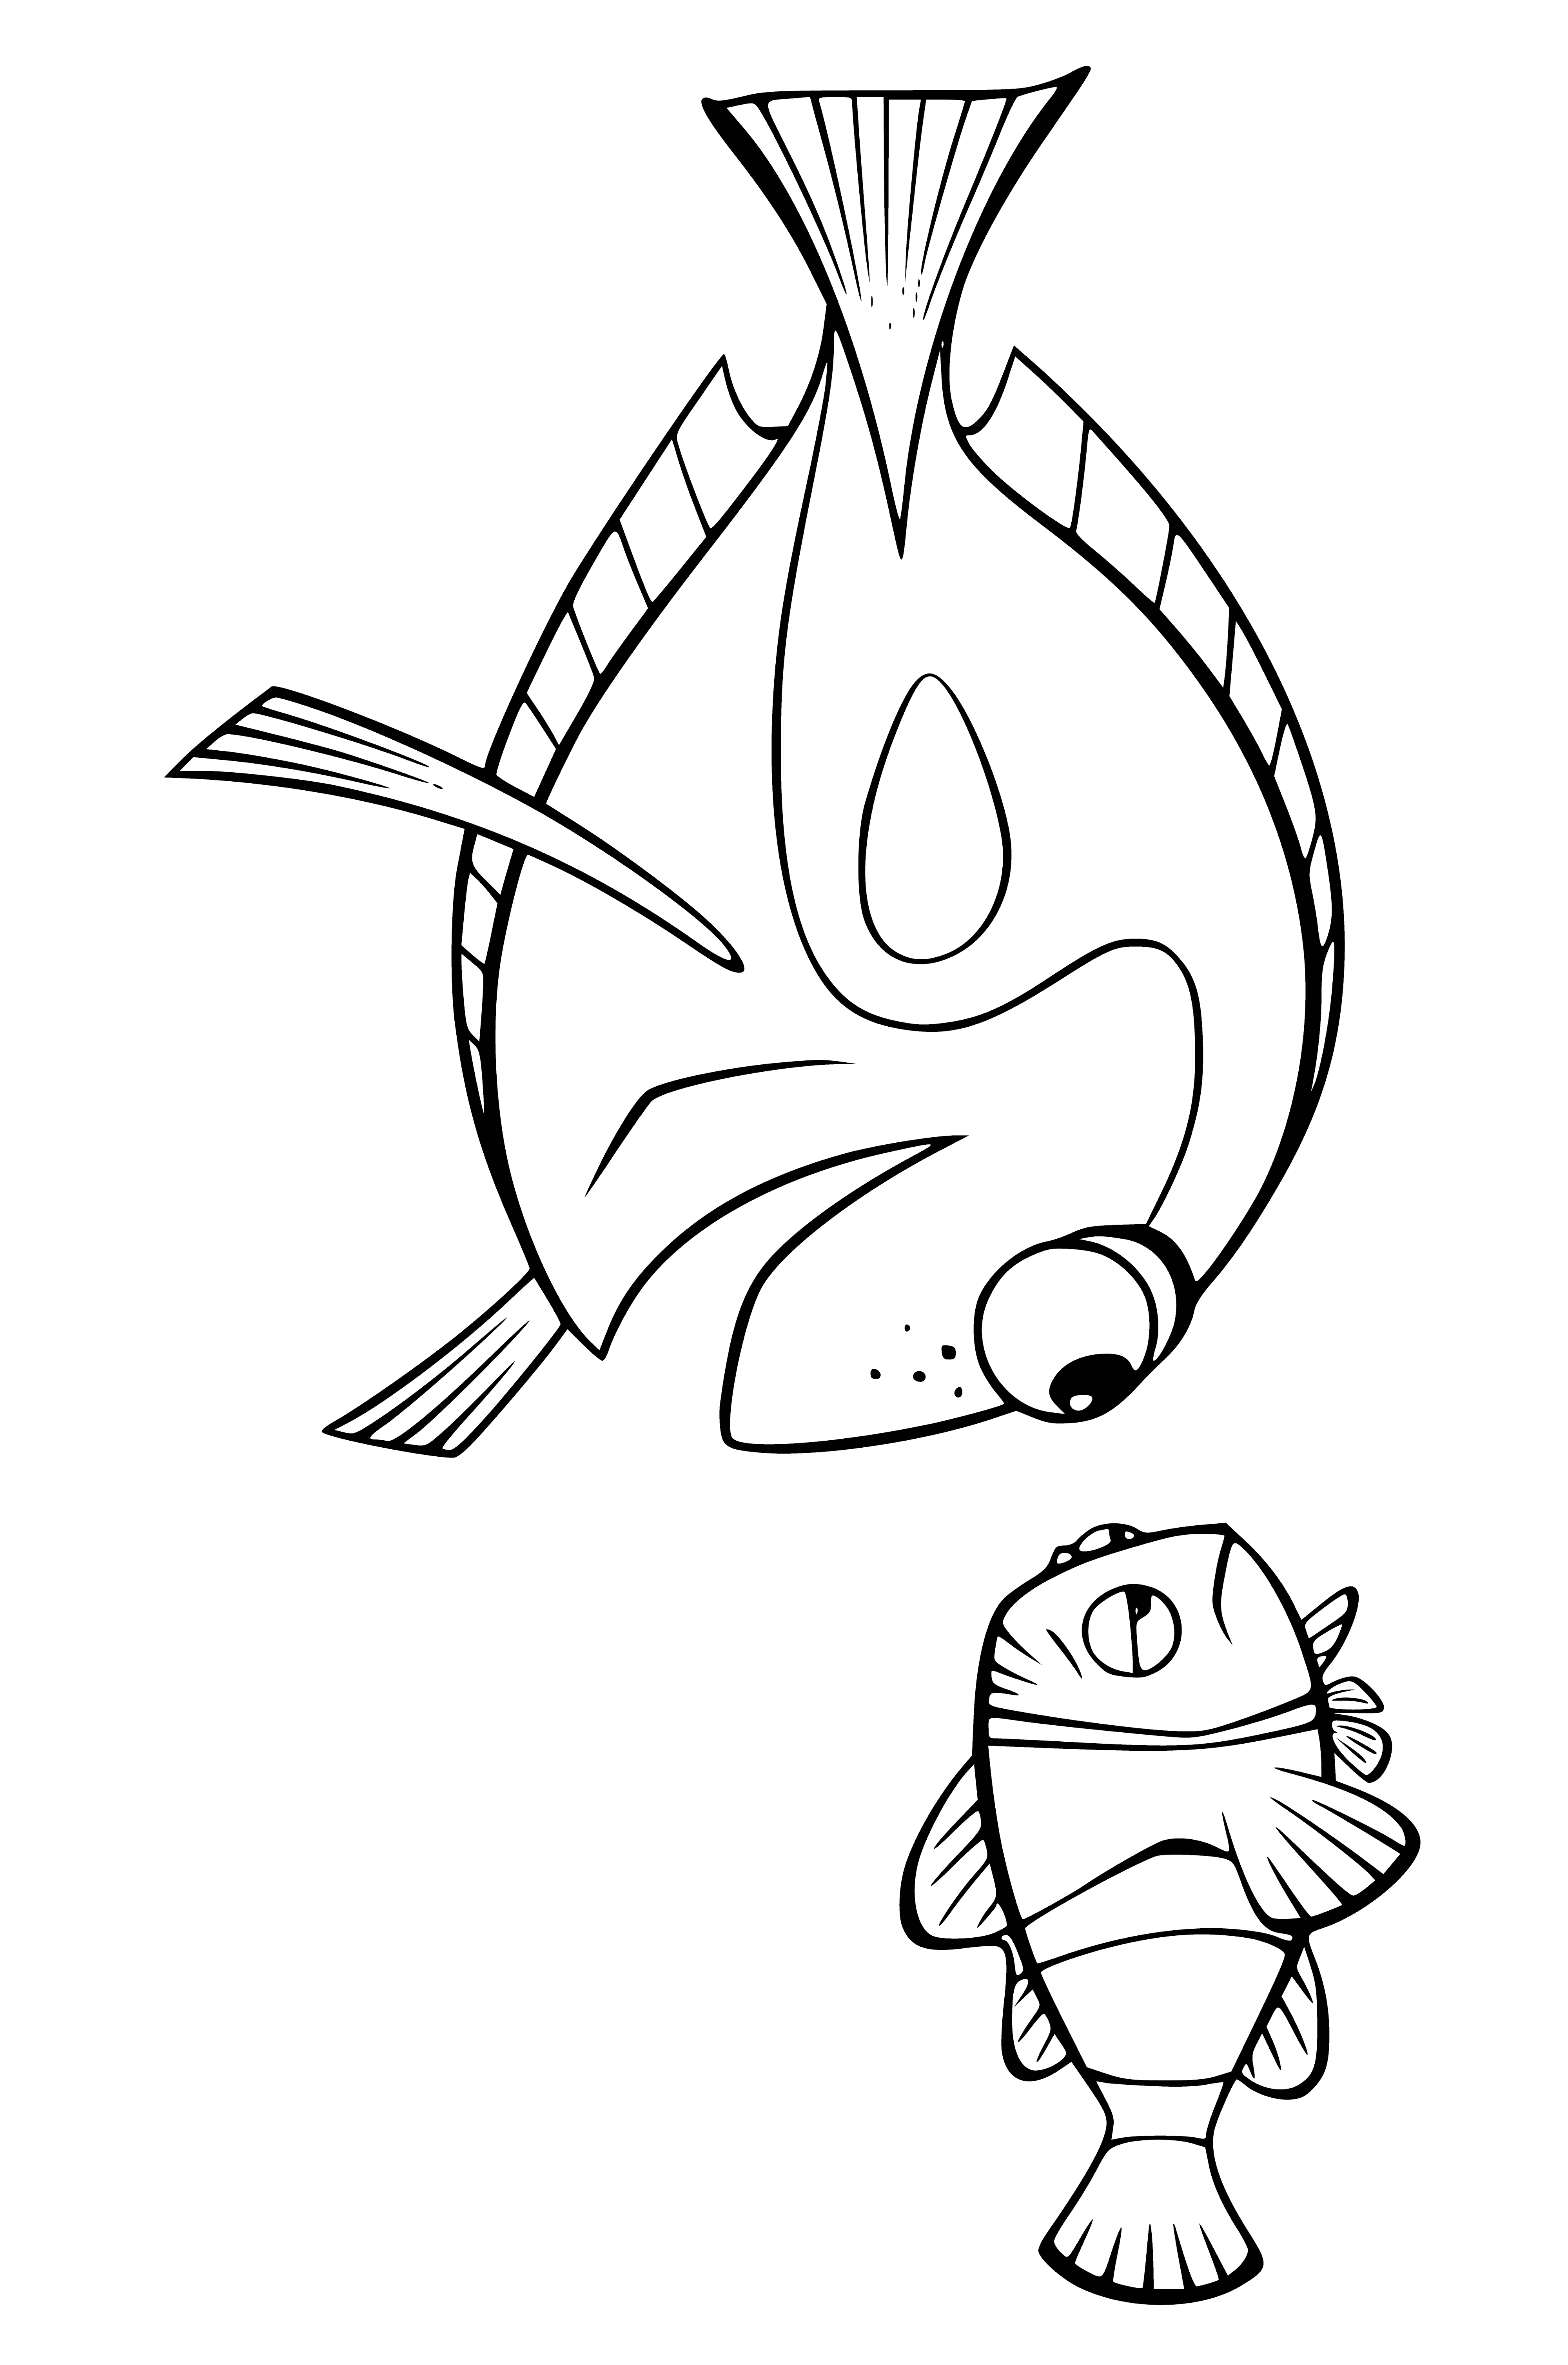 coloring page: Three fish on Finding Nemo coloring page: orange/white stripes, blue/white spots, purple/white spots; left & right w/ open mouths, middle closed.